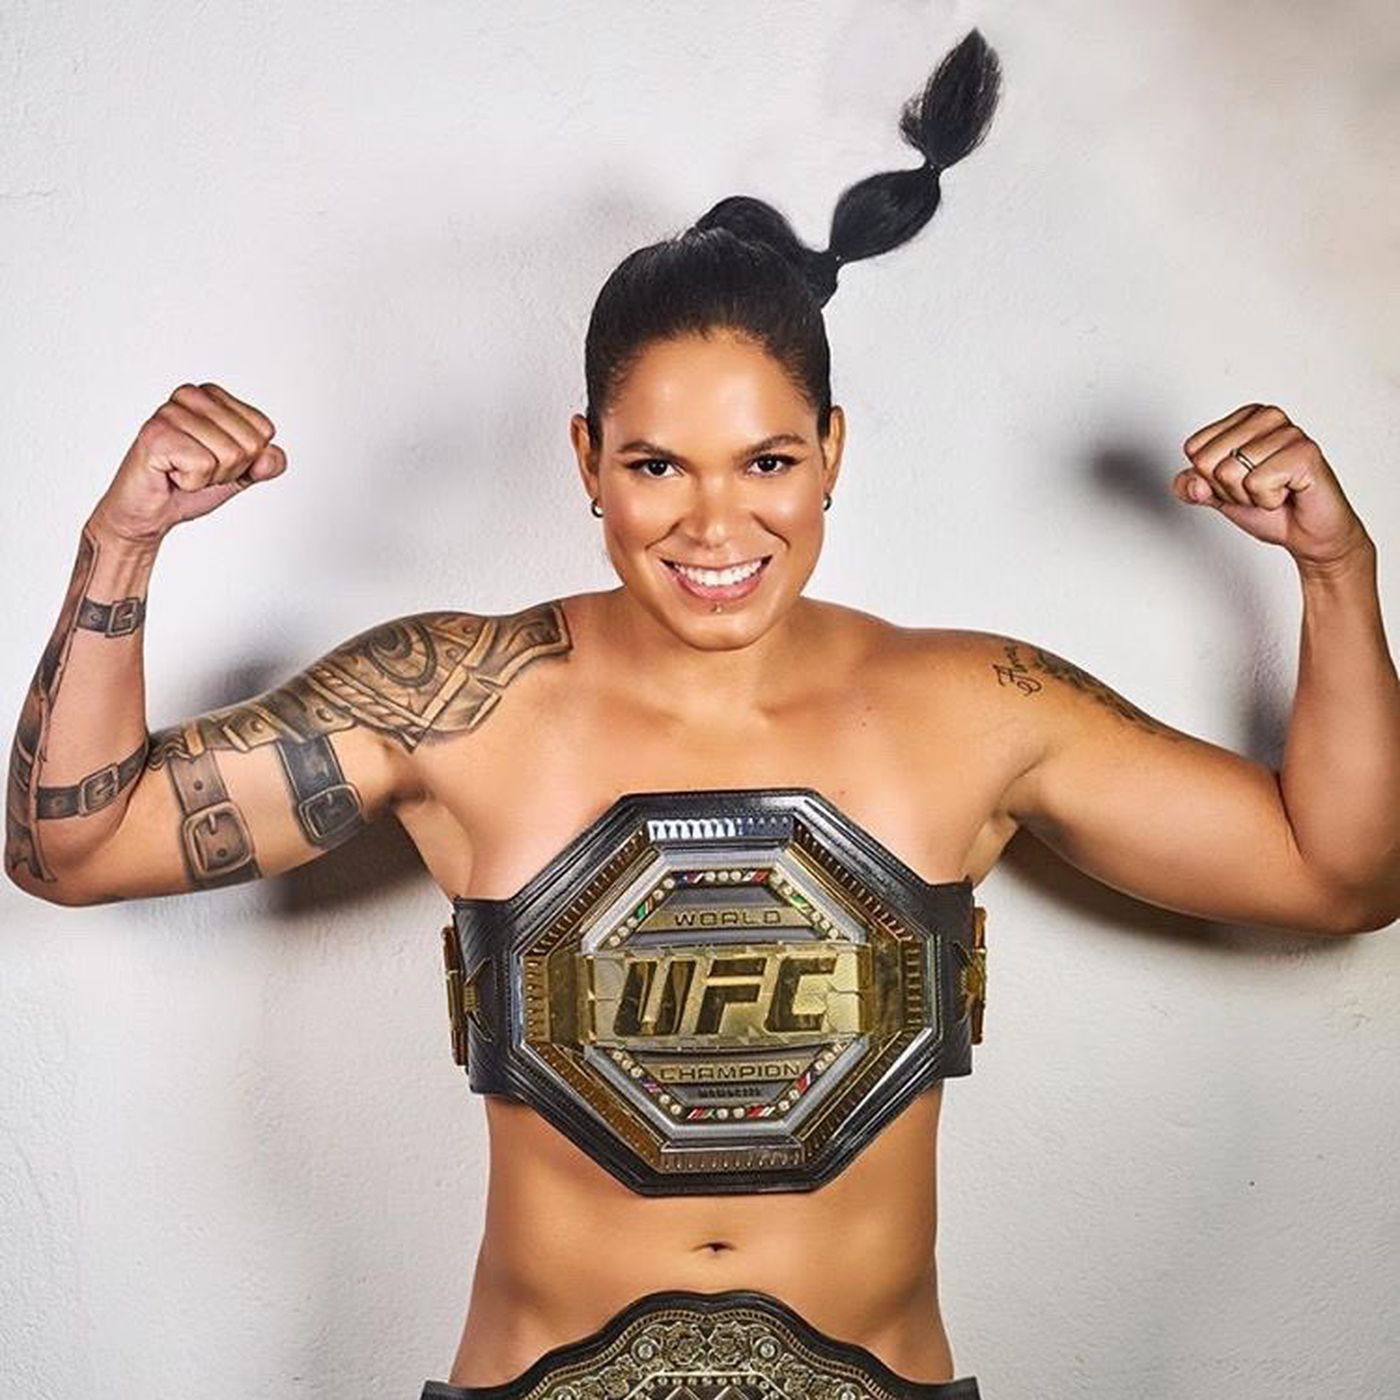 Ufc fighters female nude Pic: UFC